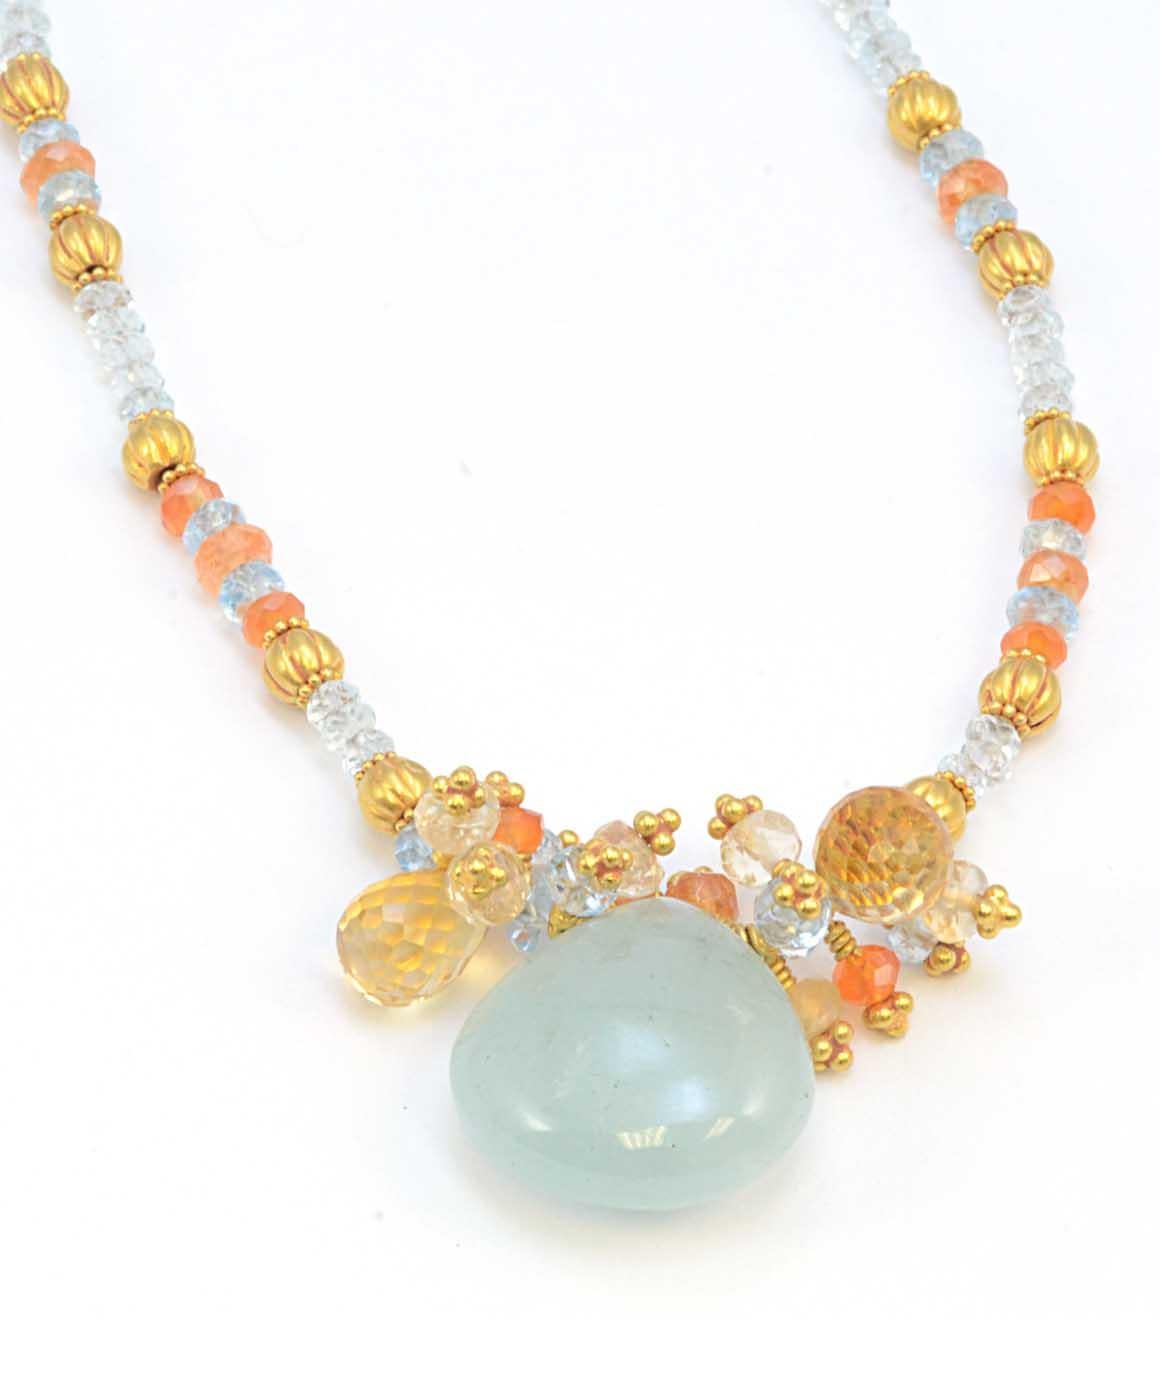 Women's or Men's Solid 22 Karat Yellow Gold Genuine Aquamarine and Natural Citrine Necklace 17.1g